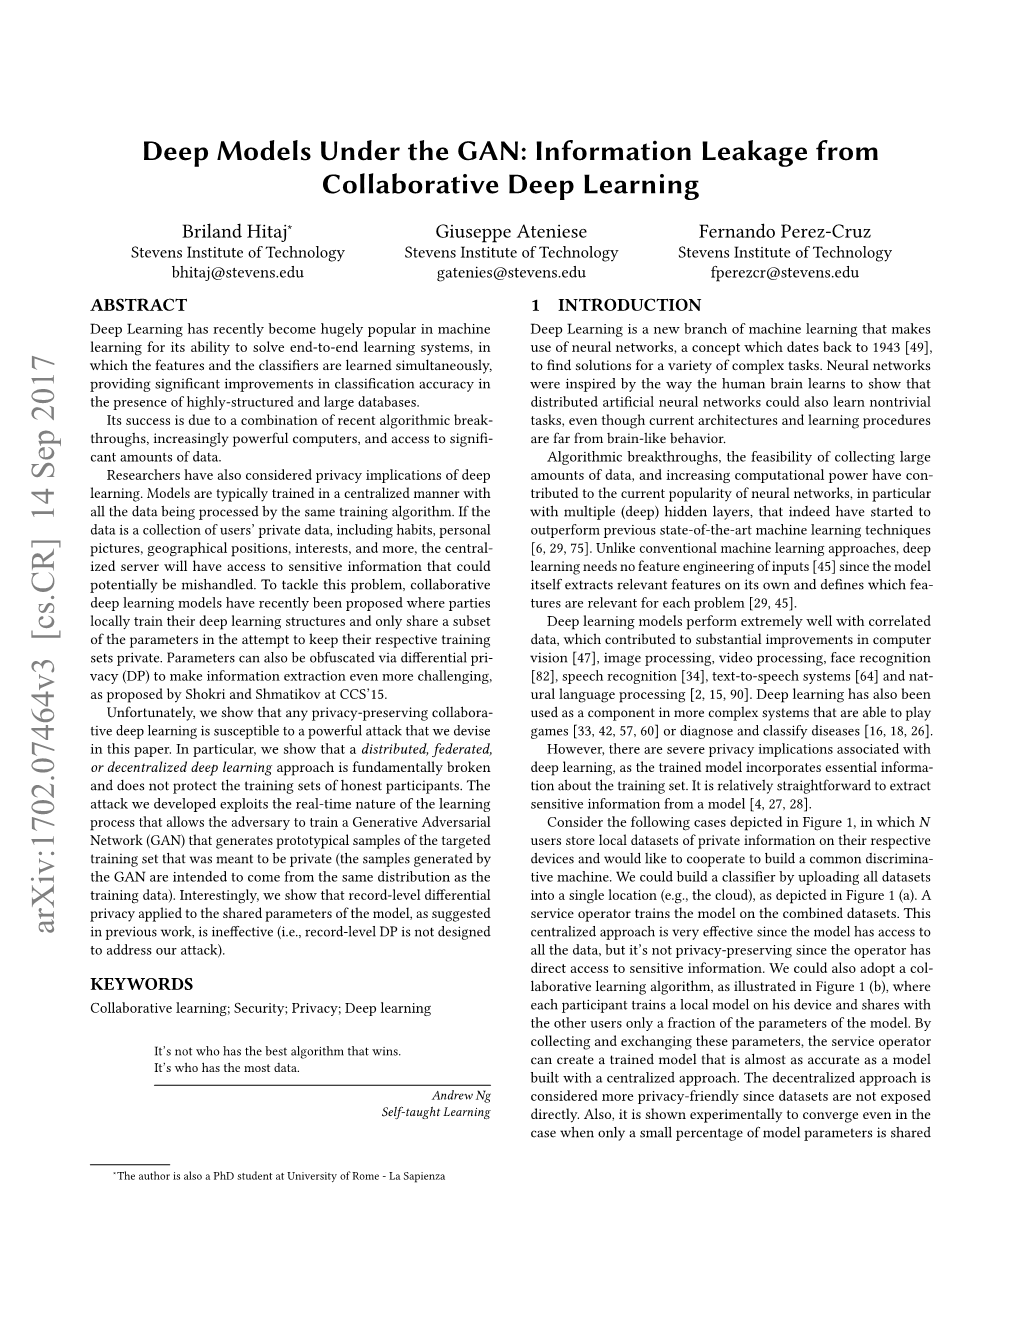 Deep Models Under the GAN: Information Leakage from Collaborative Deep Learning